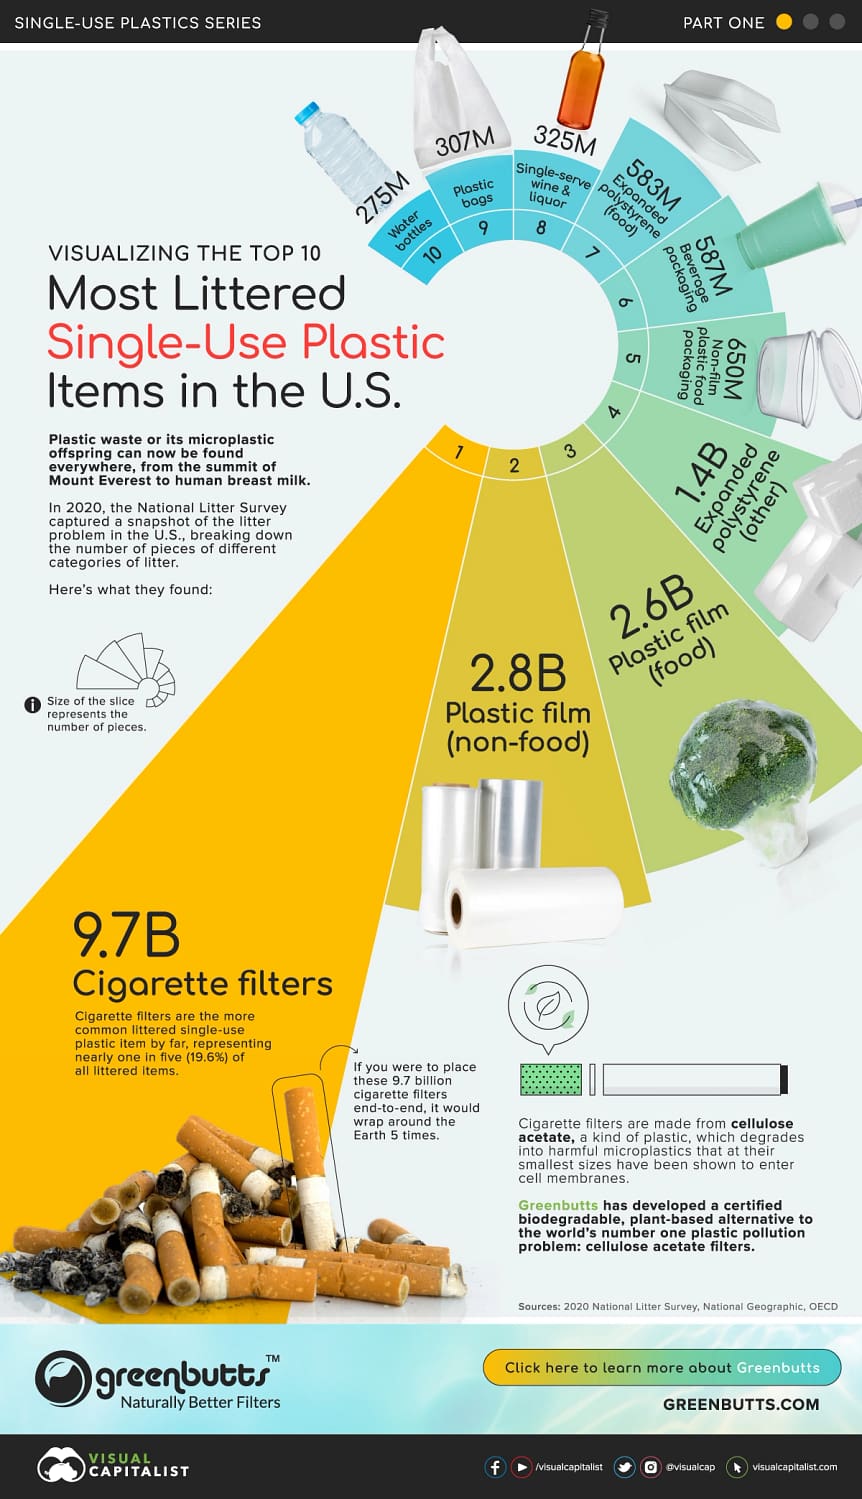 <strong>Top 10 Most Littered Plastic Items in the U.S.</strong>